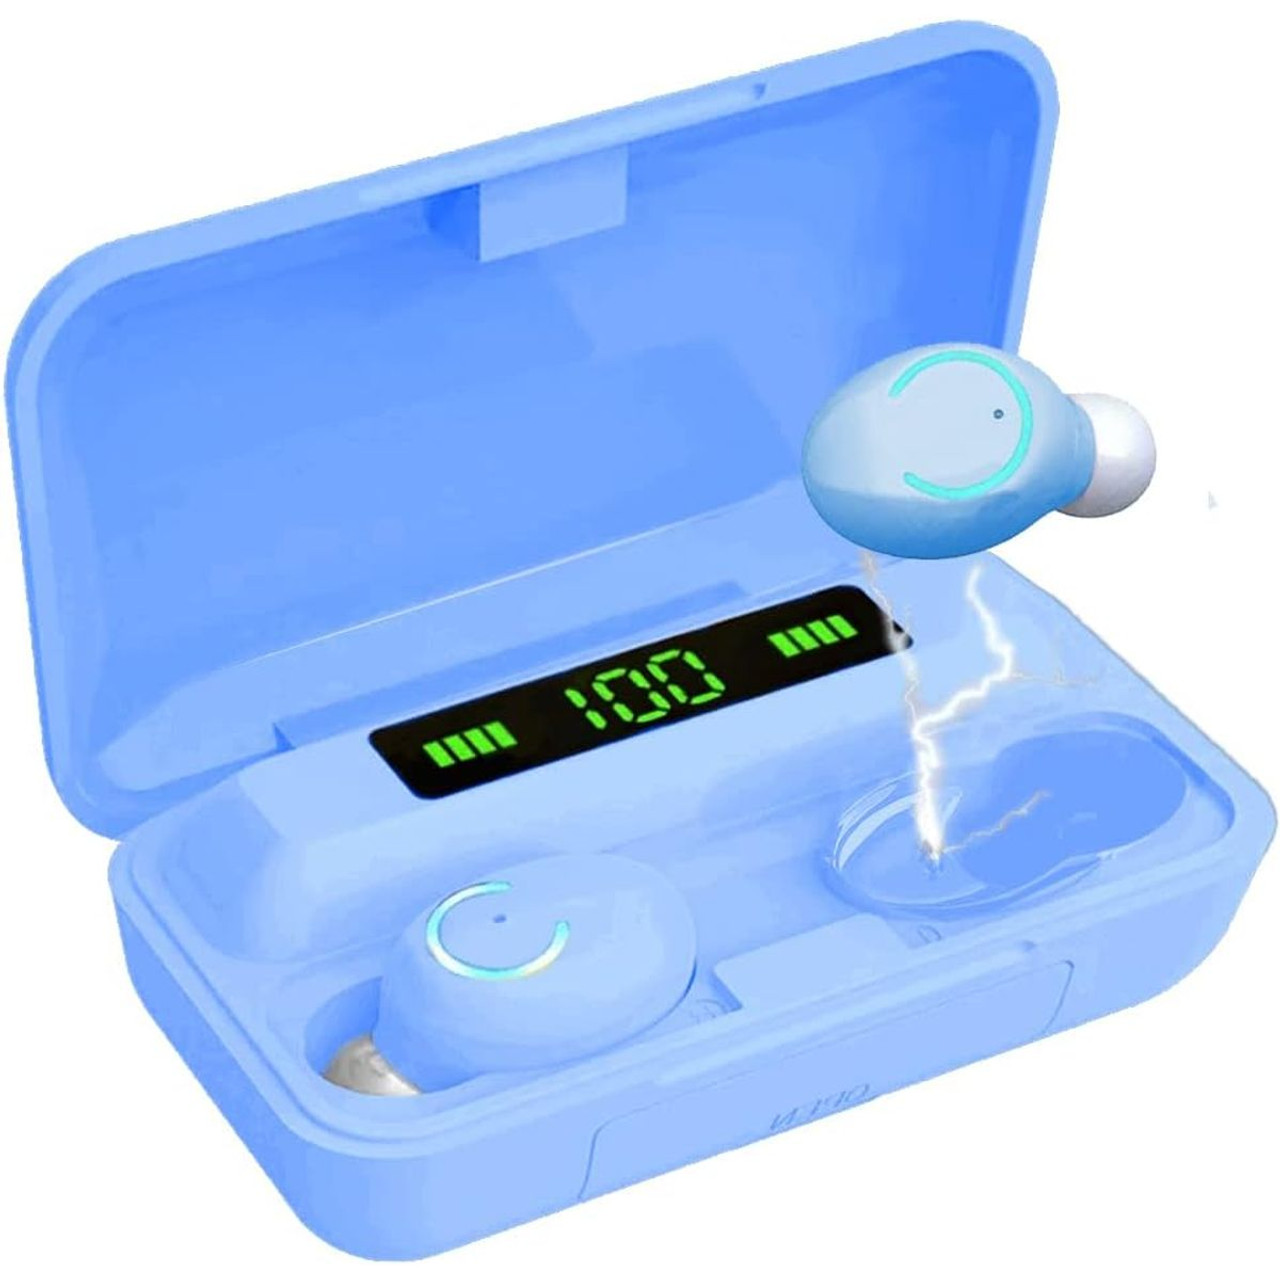 Acuvar™ Wireless BT 5.0 Rechargeable IPX7 Waterproof Earbuds with Case product image